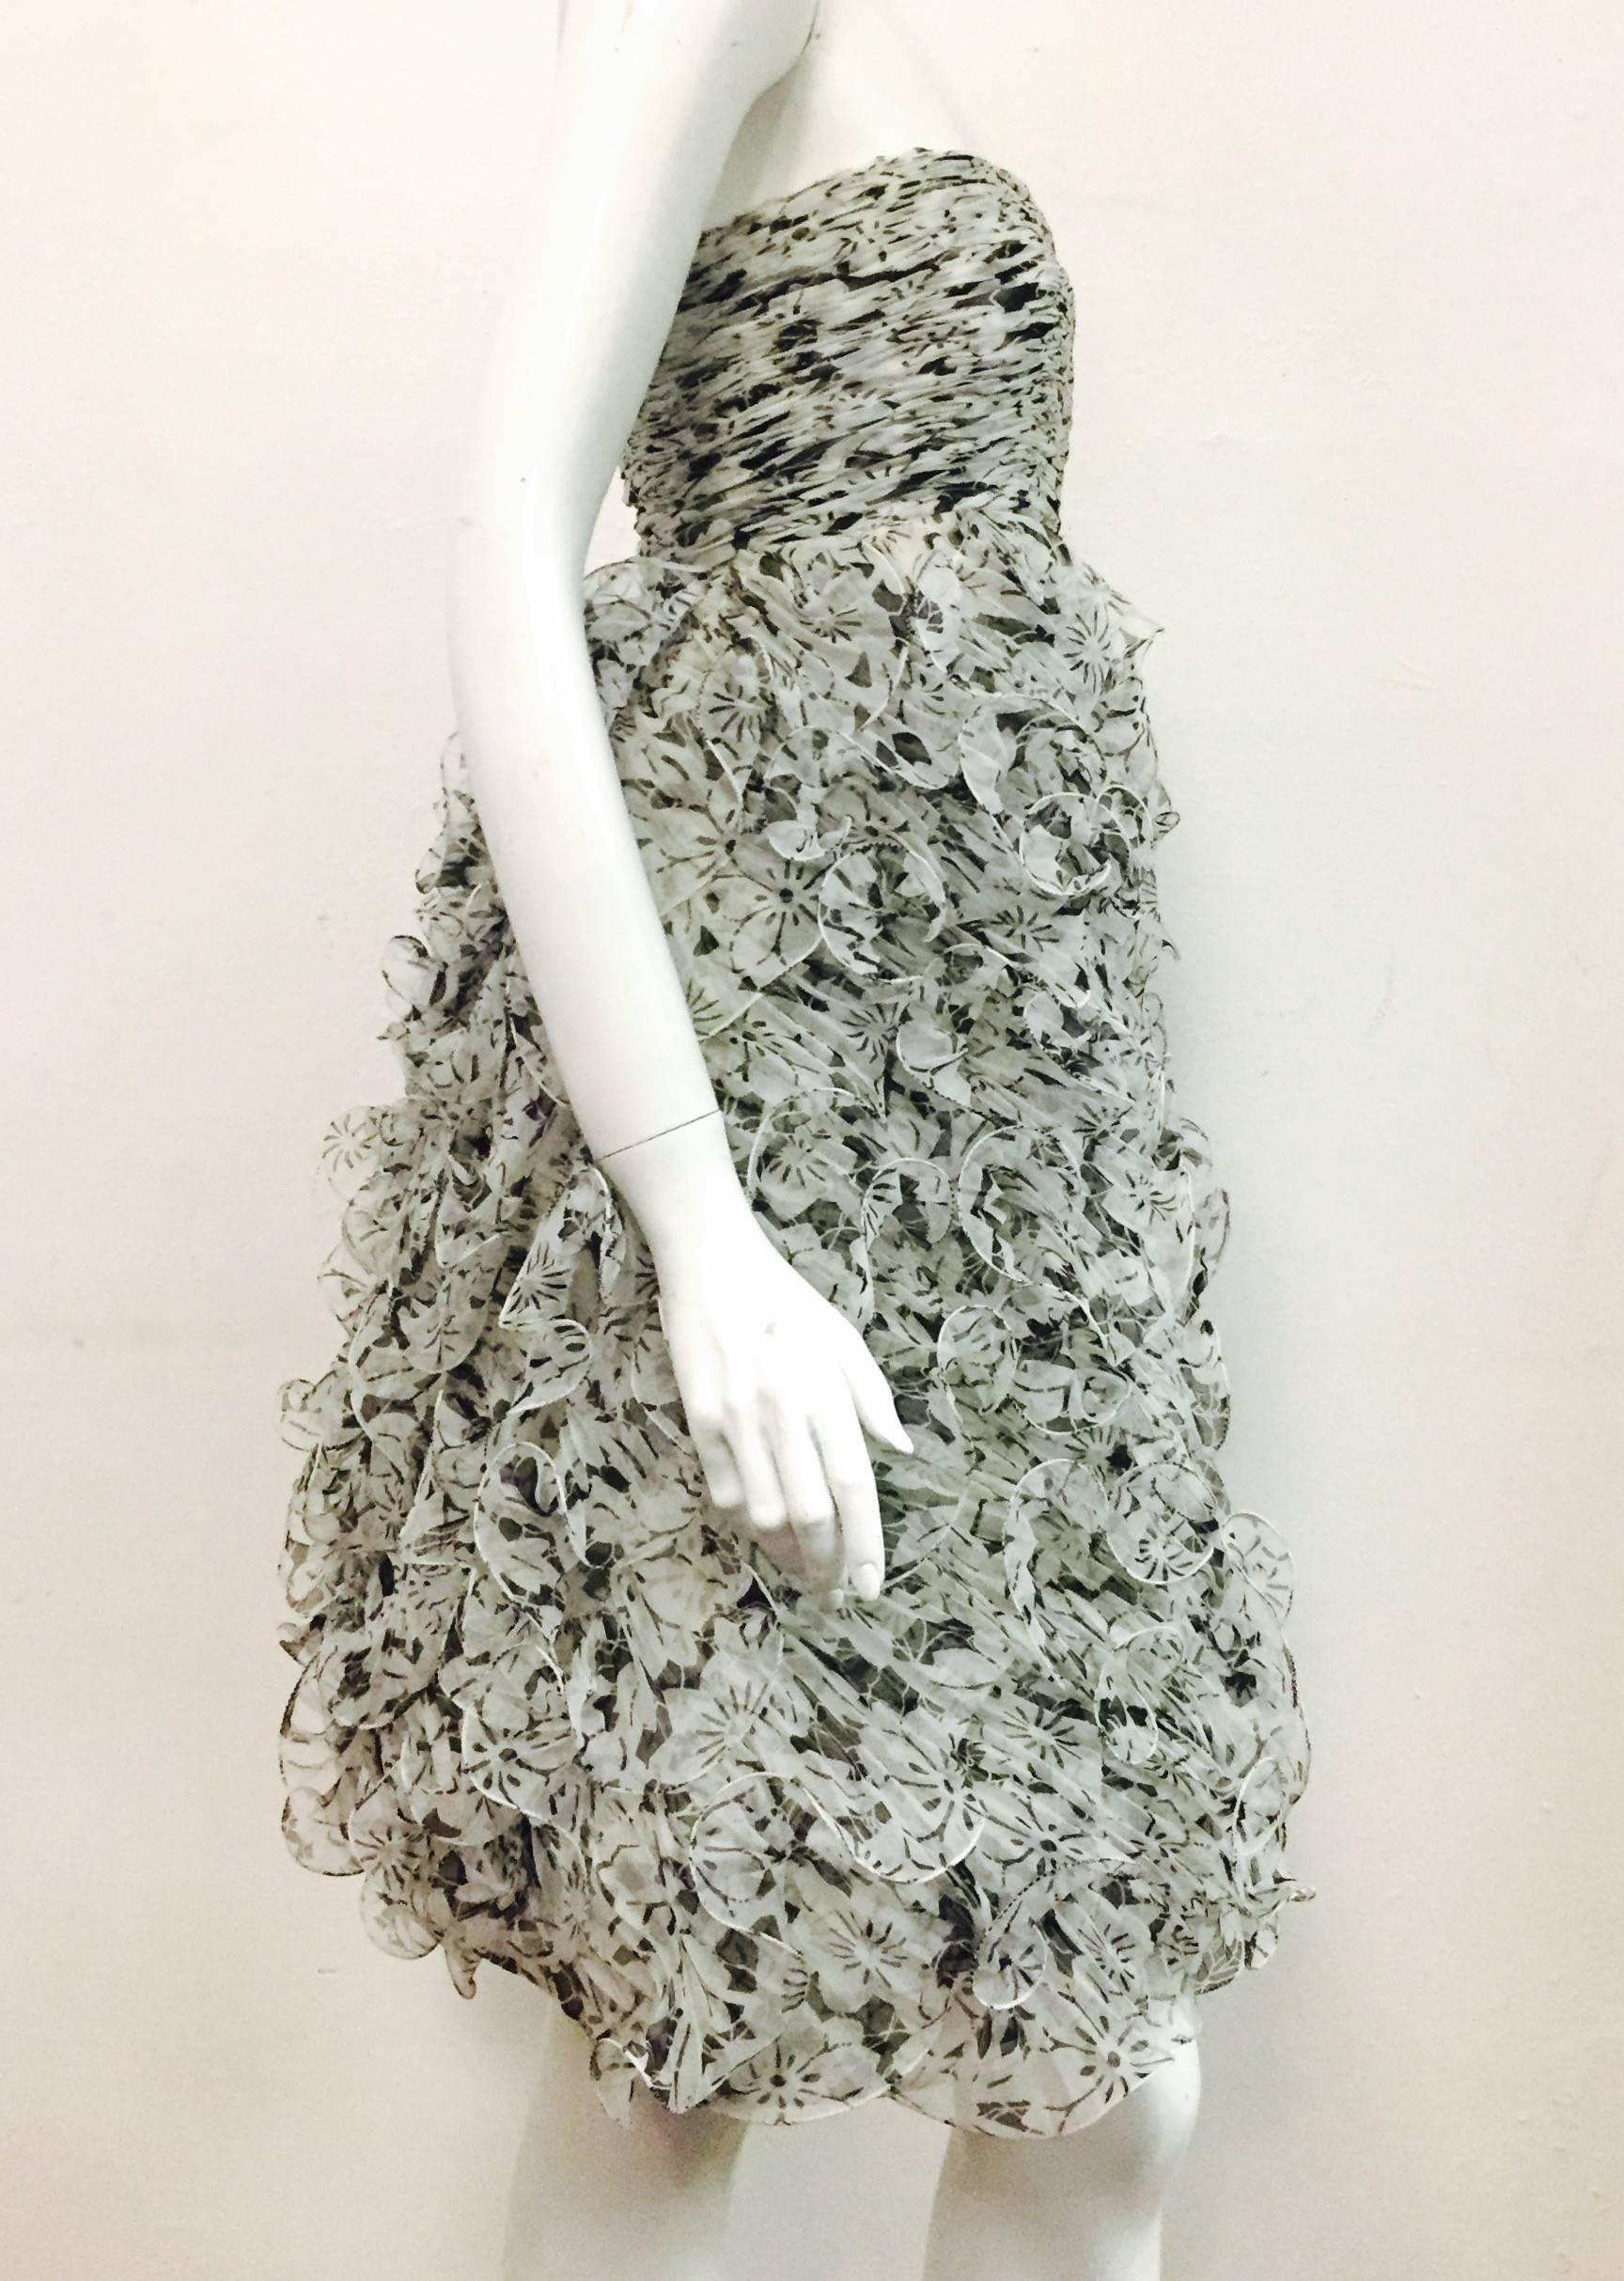 Breathtaking Oscar de la Renta Dress is meticulously constructed of black and white Silk Faille.  The bodice has a boned inner structure which includes a bra.  This bodice is created with the accordion pleats but in a ruched style empire waist.  The